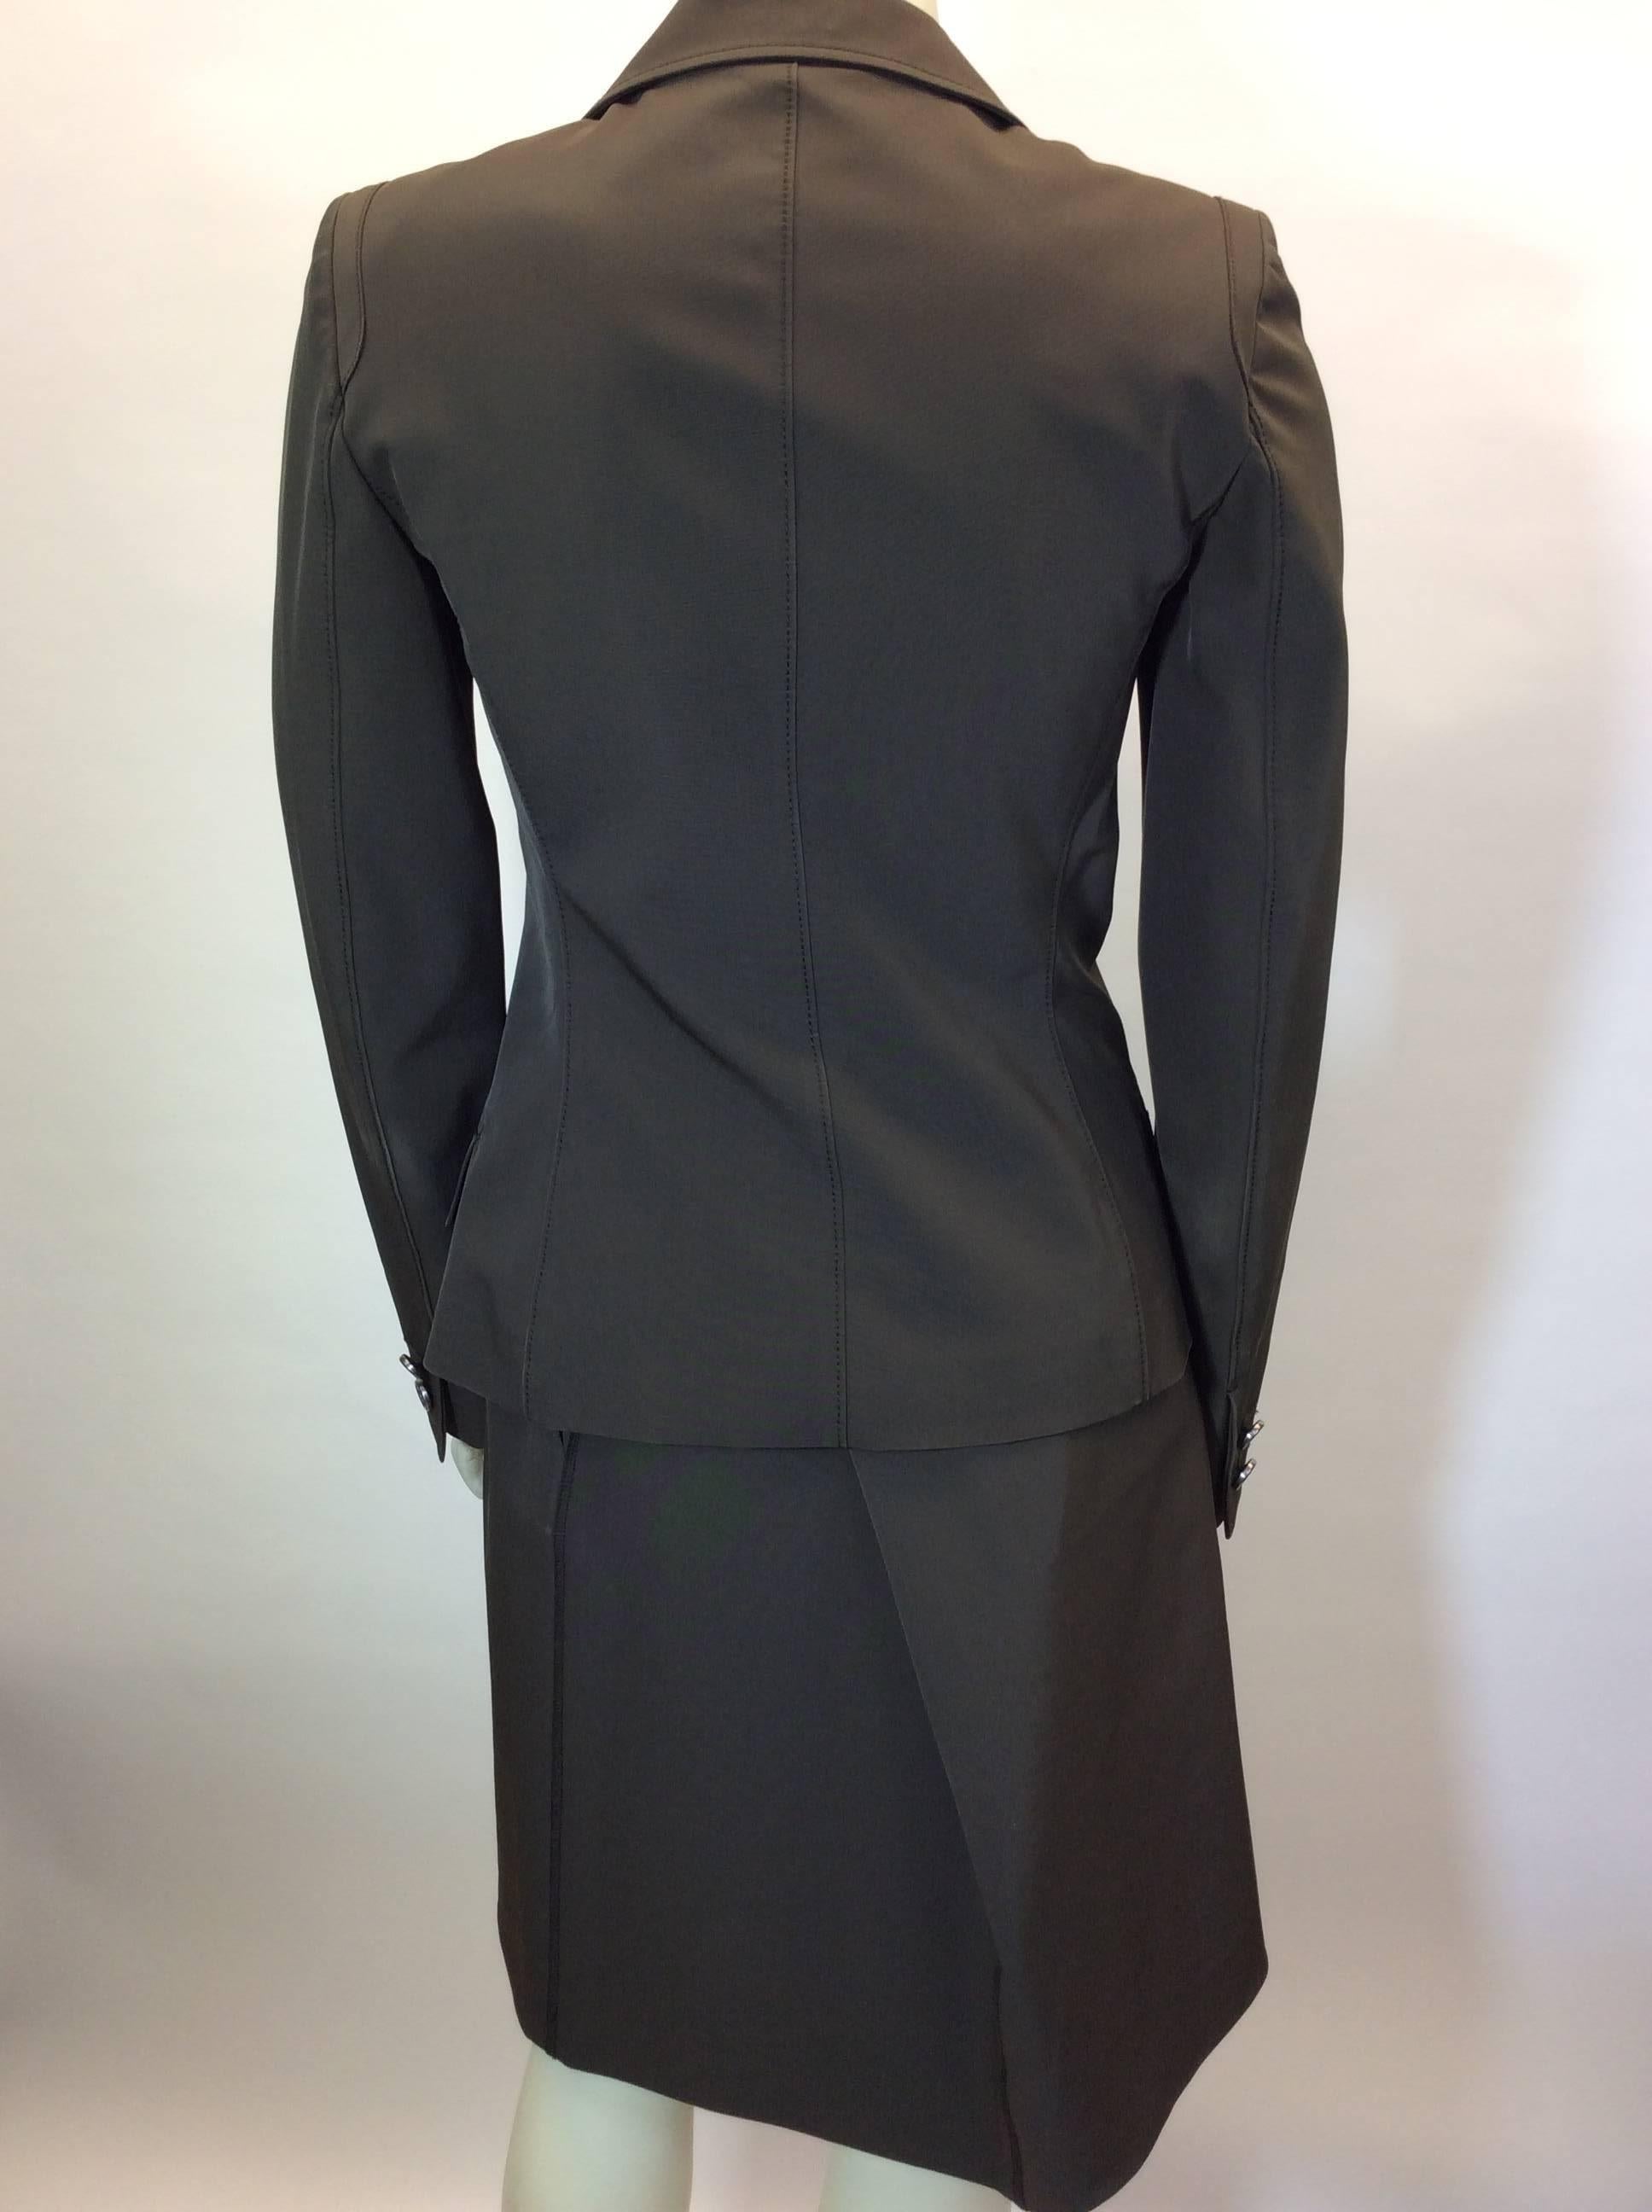 Prada Brown Skirt Suit with 3 Button Blazer In Excellent Condition For Sale In Narberth, PA